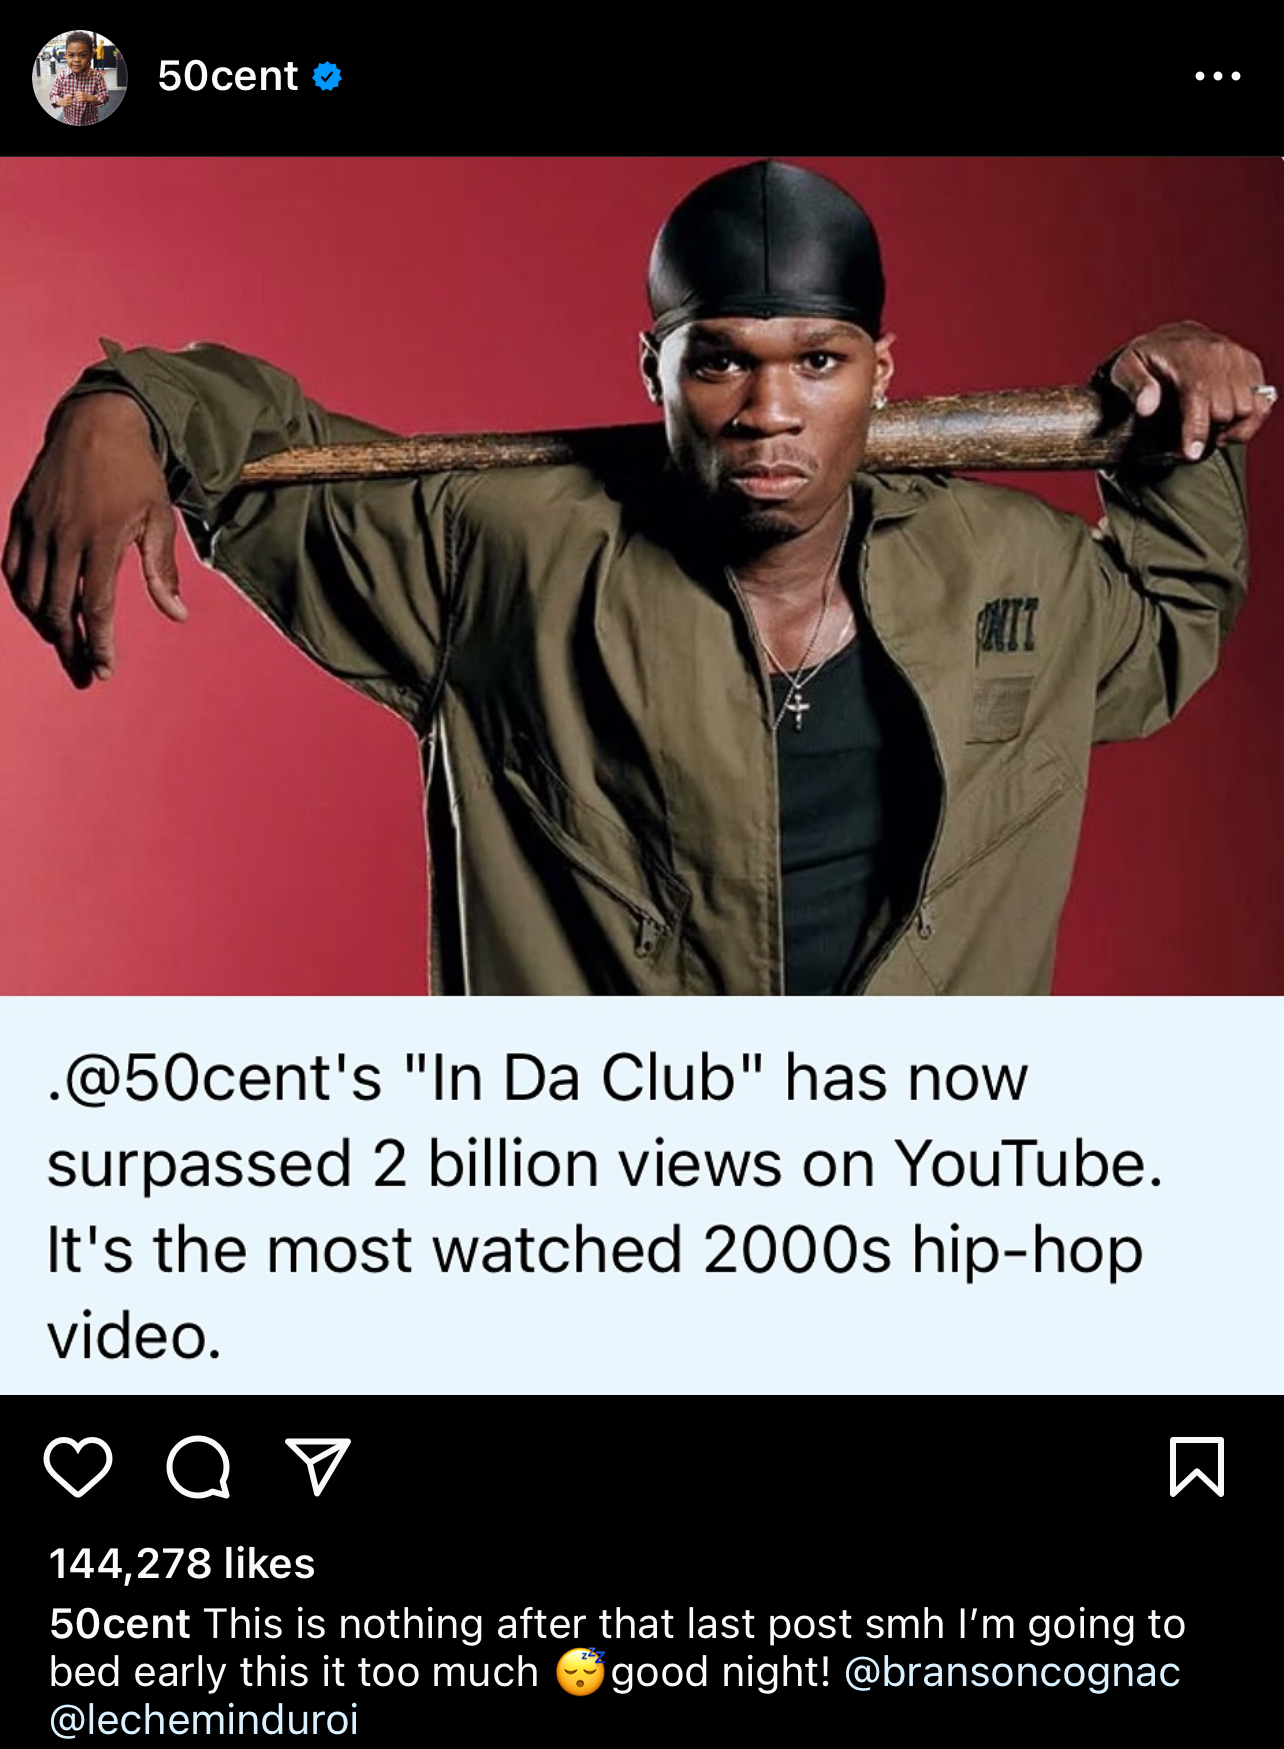 50 Cent poses with a baseball bat on his shoulders